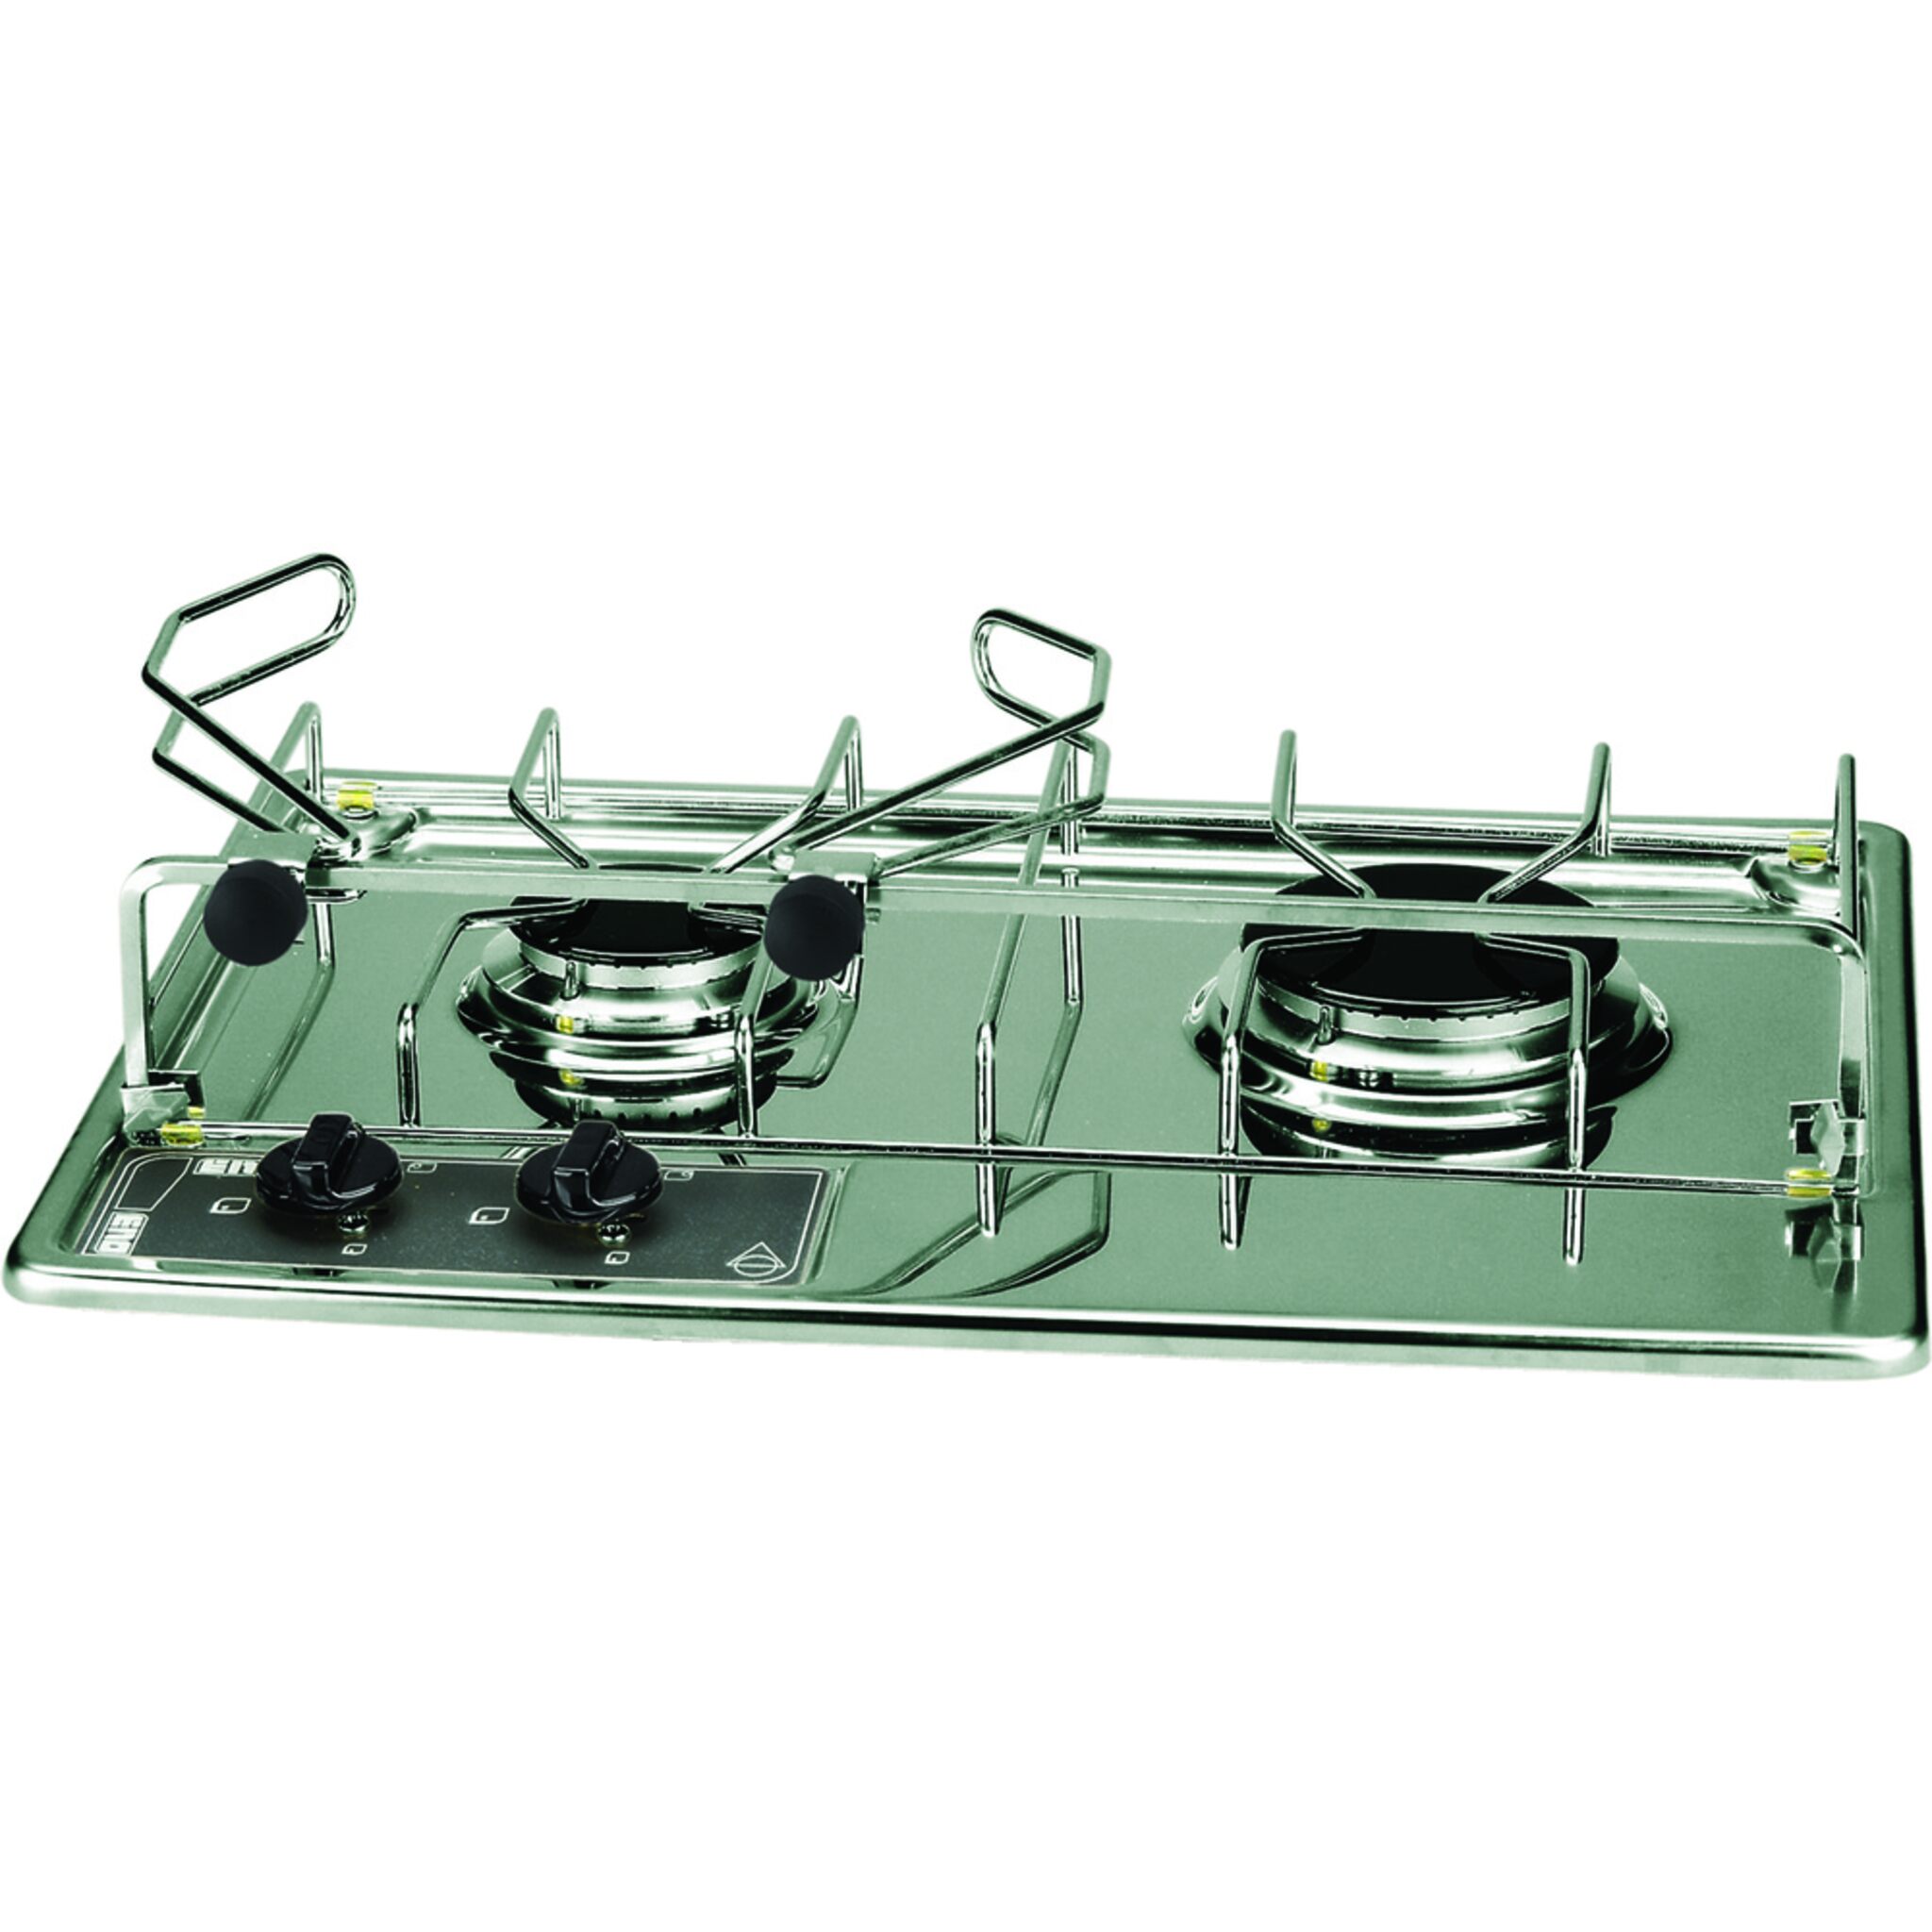 ENO built-in gas stove 30 mbar